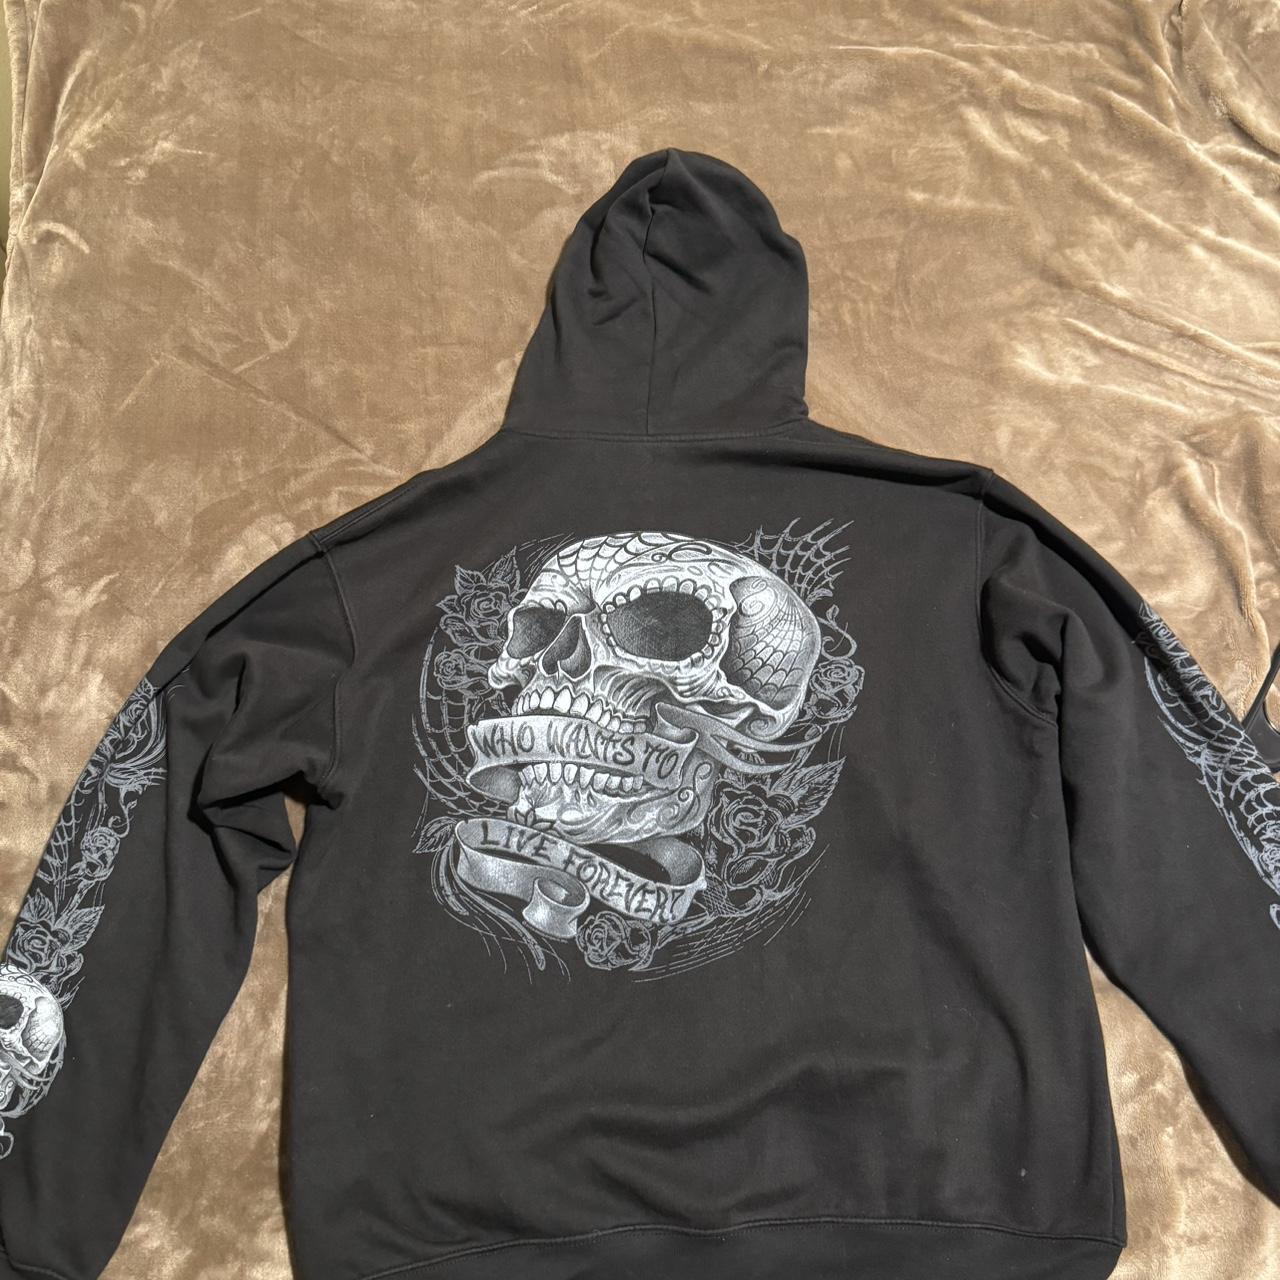 Affliction like skull hoodie size large and has a... - Depop